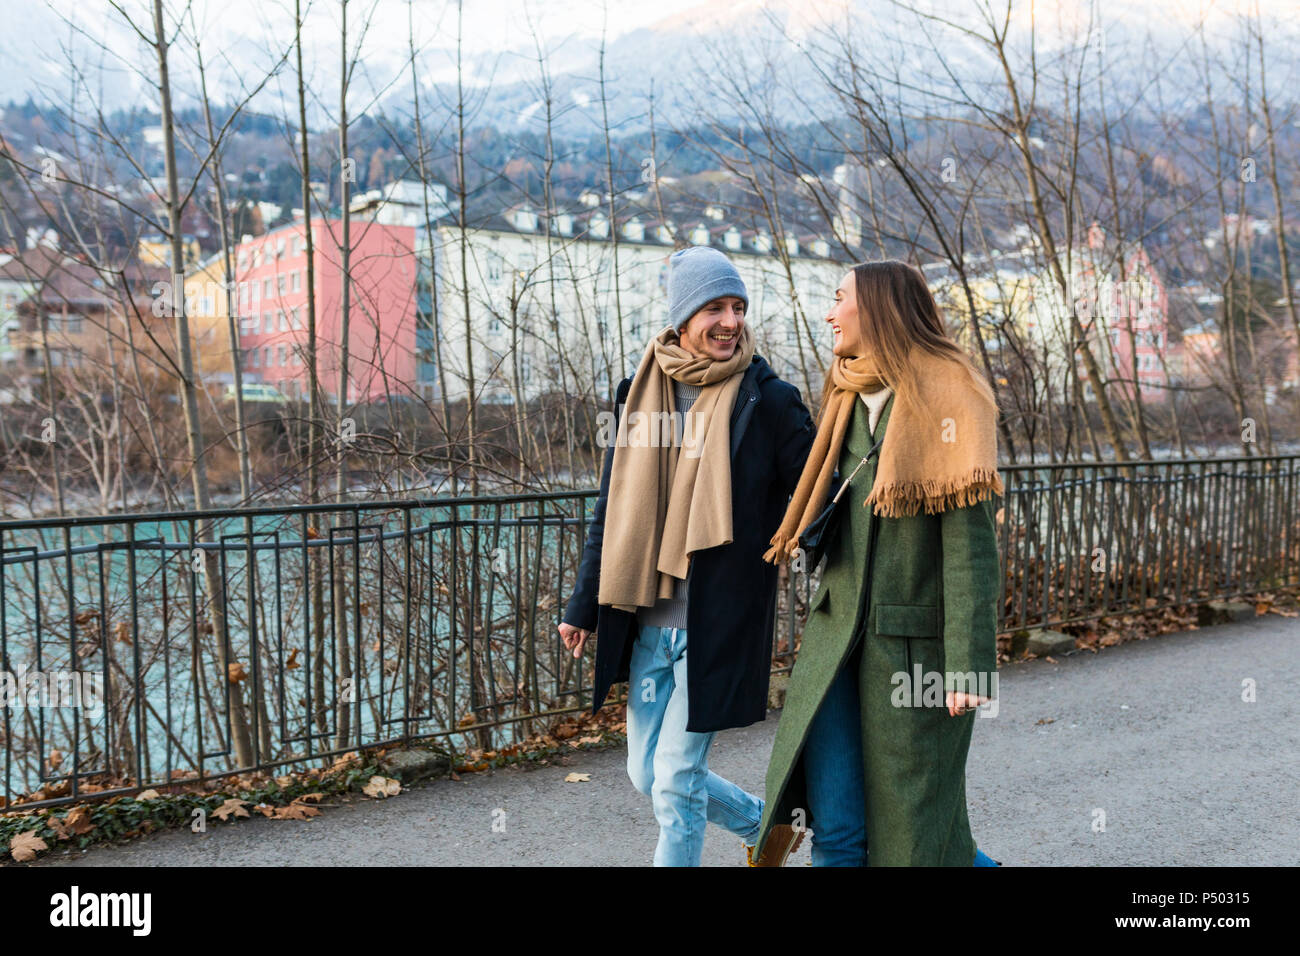 Austria, Innsbruck, happy young couple strolling together at winter time Stock Photo